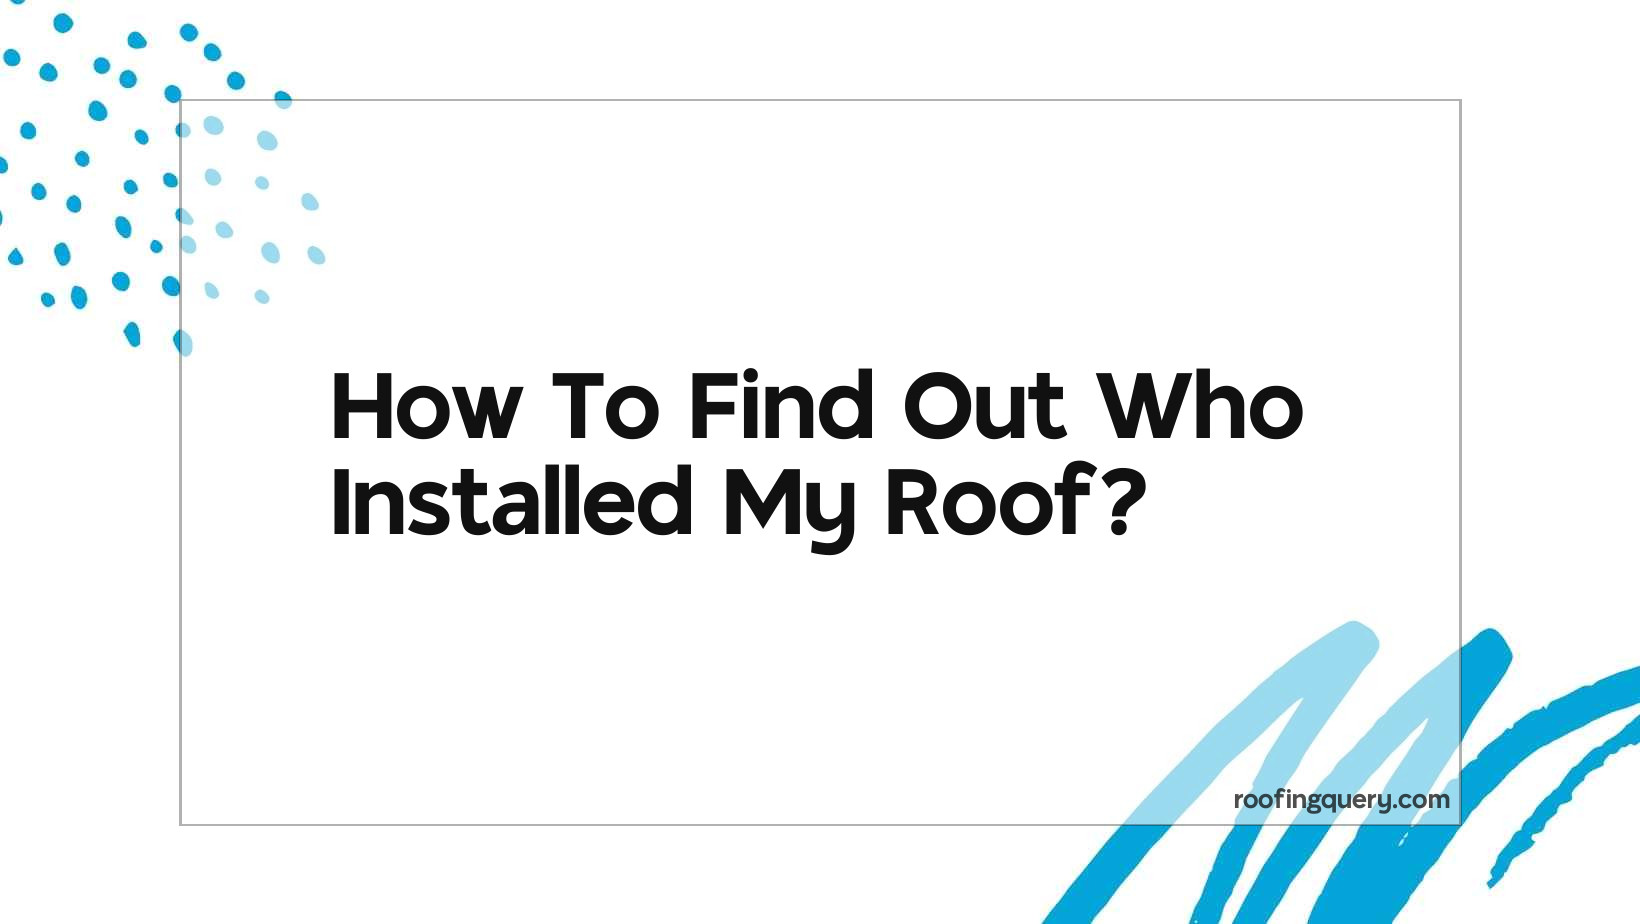 How To Find Out Who Installed My Roof?